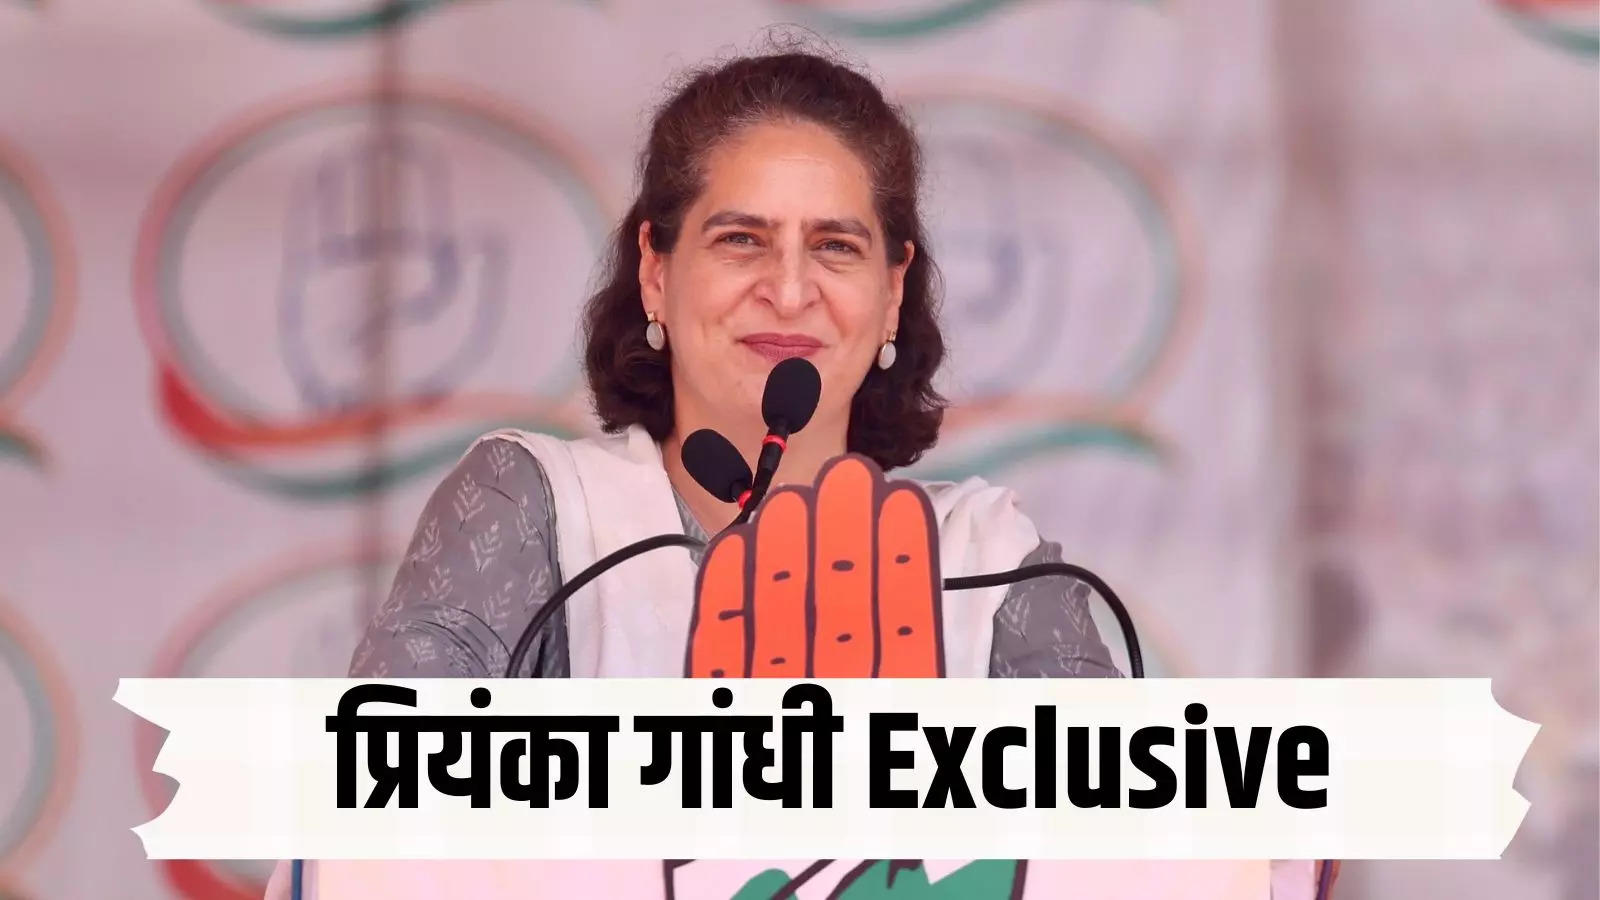 Wave of discontent against Modi government, people in mood for change… Exclusive interview of Priyanka Gandhi